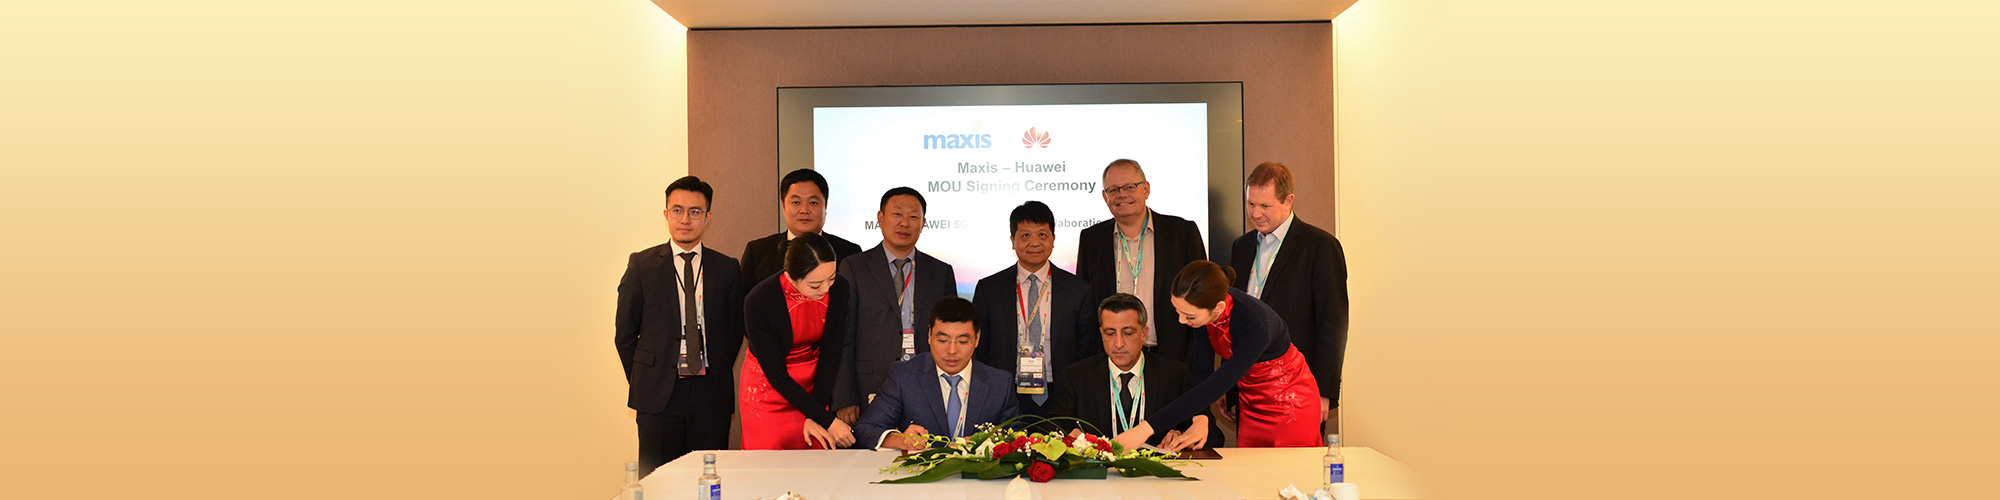 Maxis And Huawei Sign MoU On 5G Acceleration Program